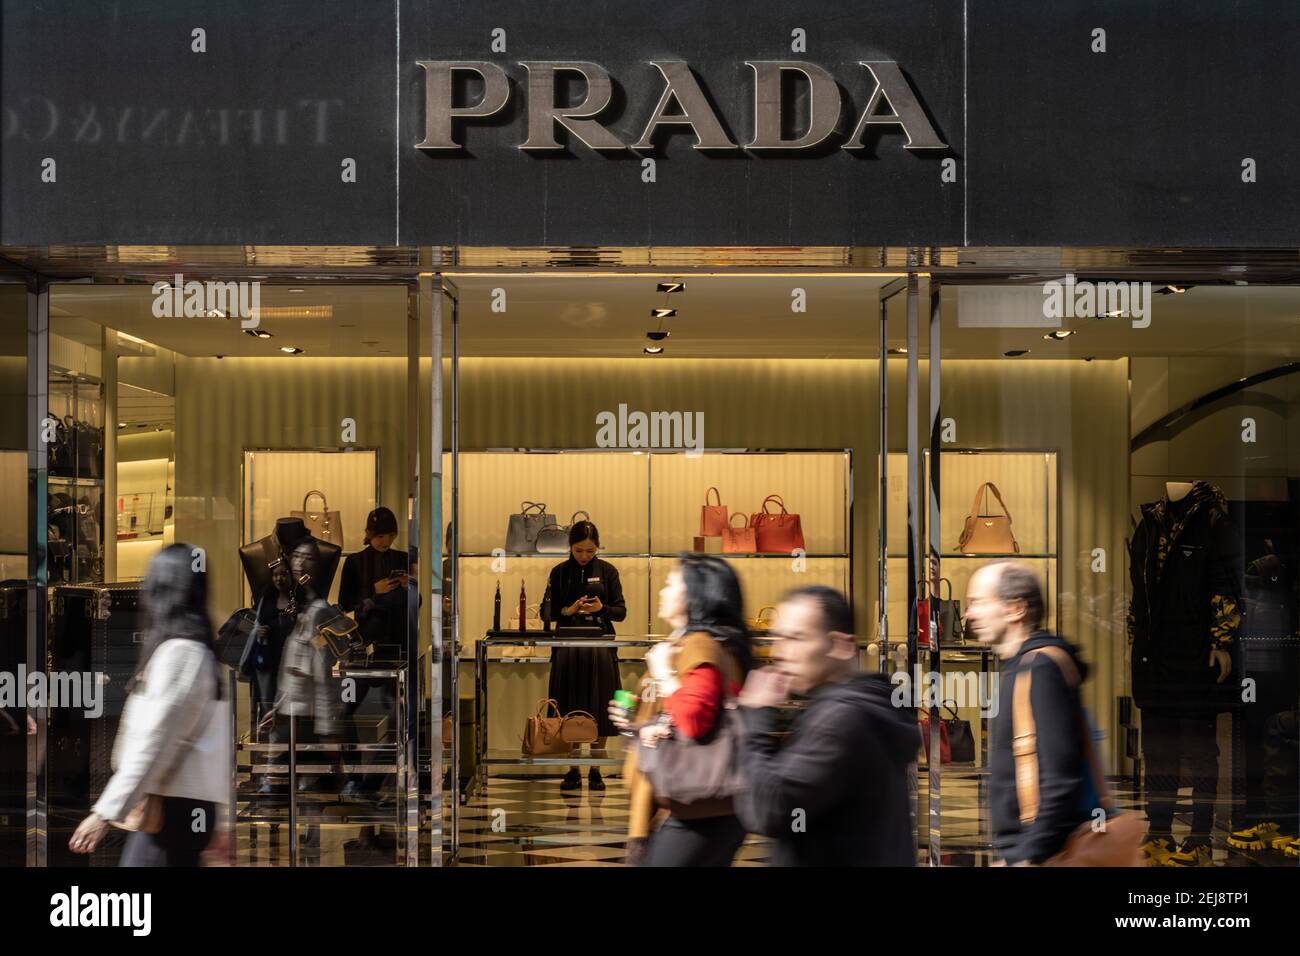 Prada will close its 15,000-square foot flagship store at Plaza 2000 along  Russell Street, Causeway Bay area, Hong Kong. China on January 6, 2020. Prada  pays HK$9 million a month, when its